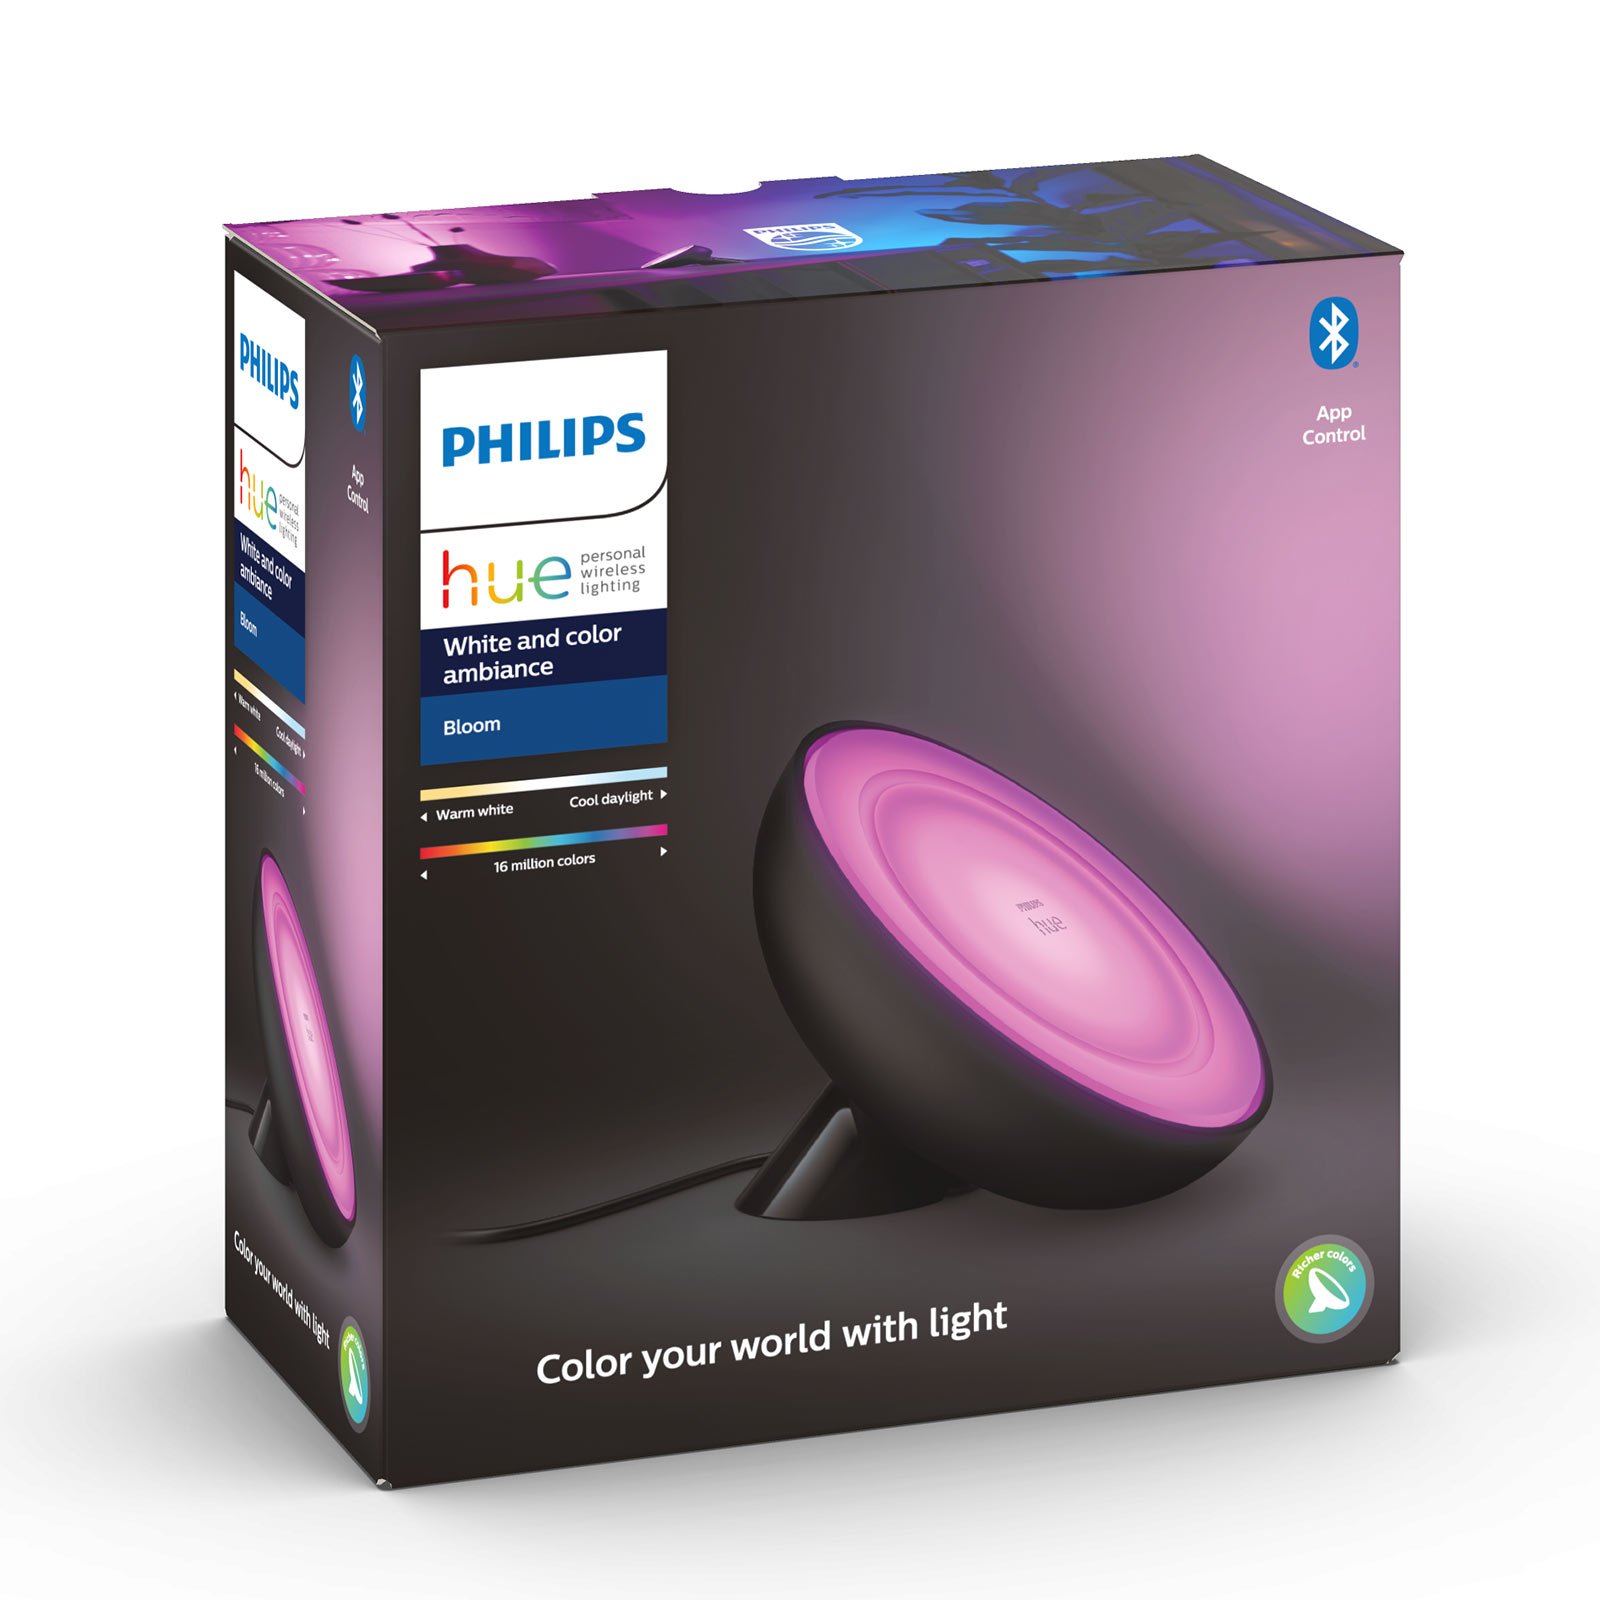 Philips Hue Bloom lampe table noire white & color